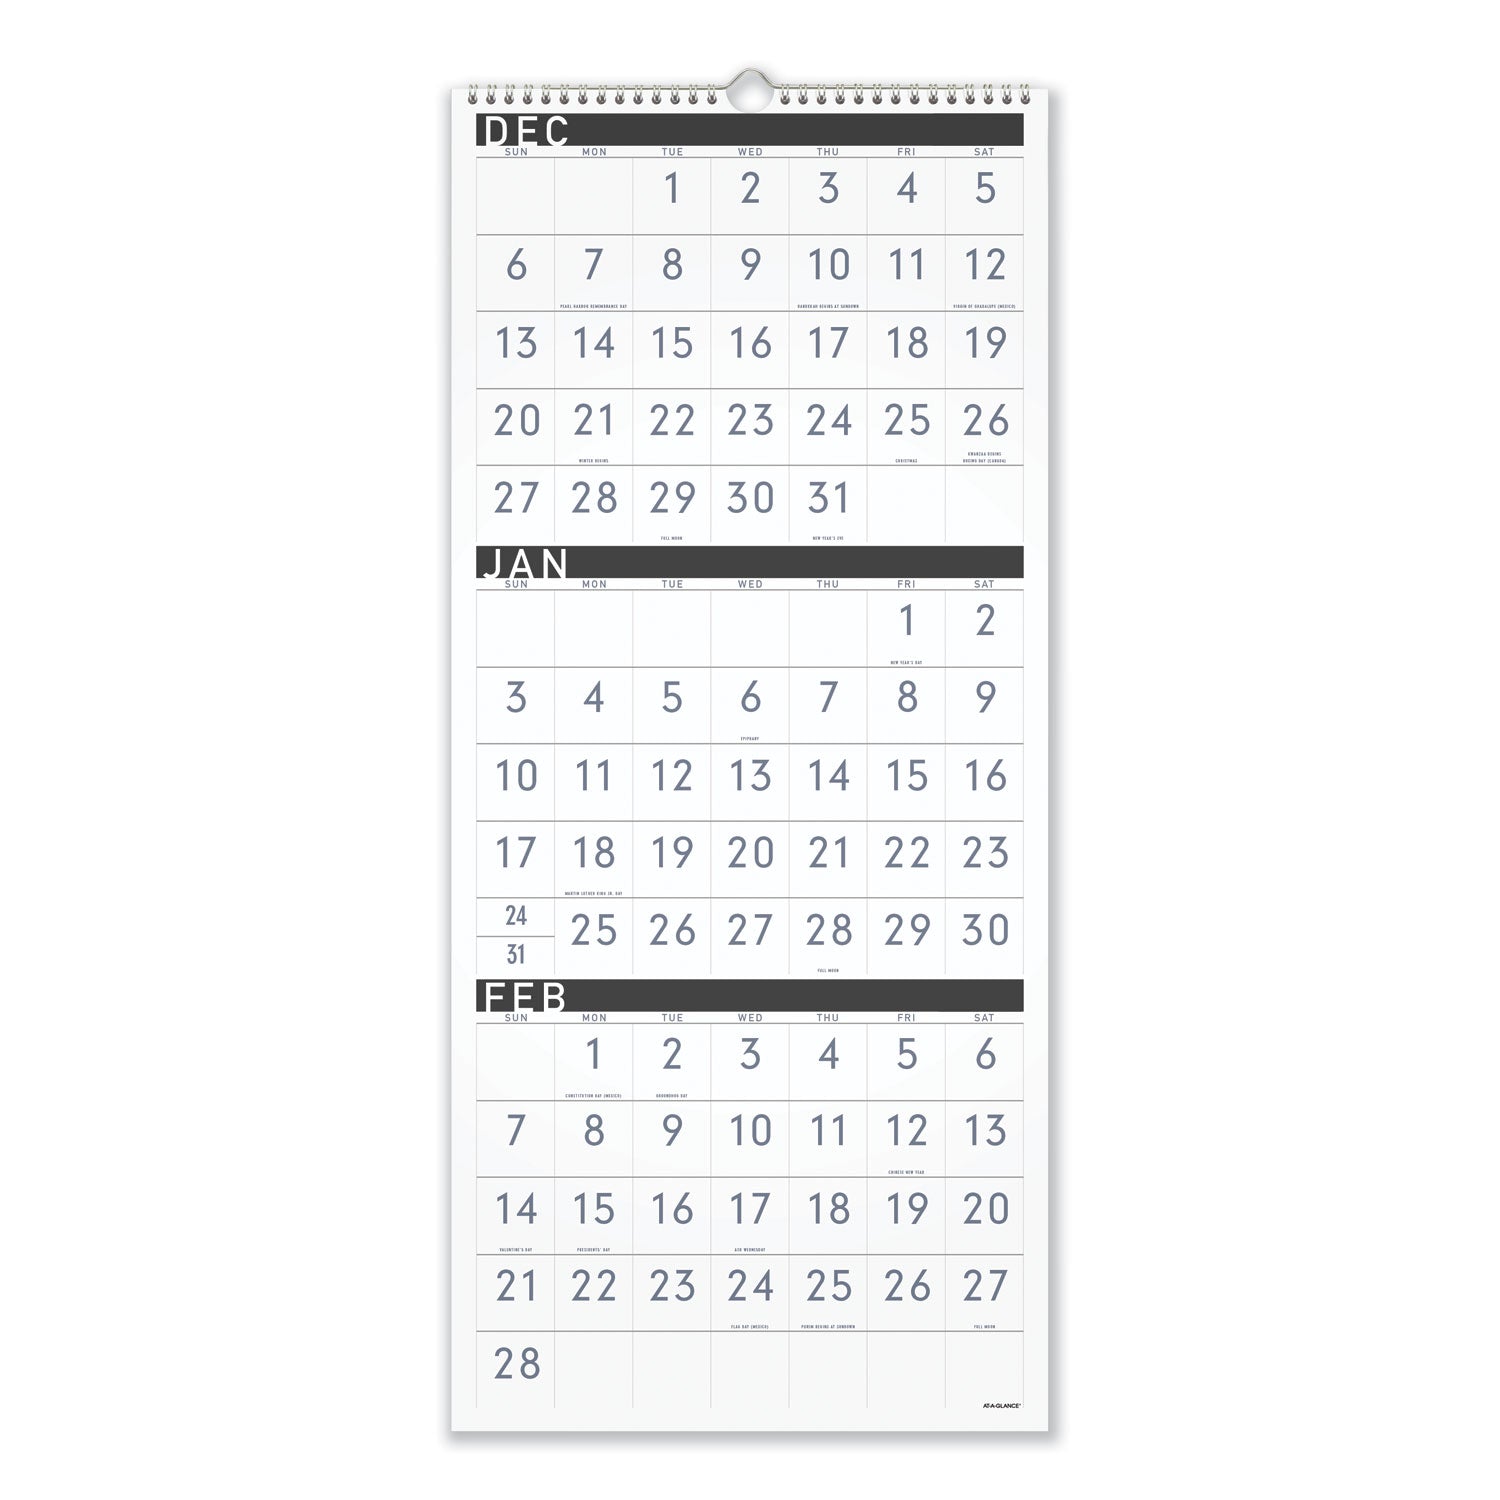 three-month-reference-wall-calendar-contemporary-artwork-formatting-12-x-27-white-sheets-15-month-dec-feb-2023-to-2025_aagpm11x28 - 1